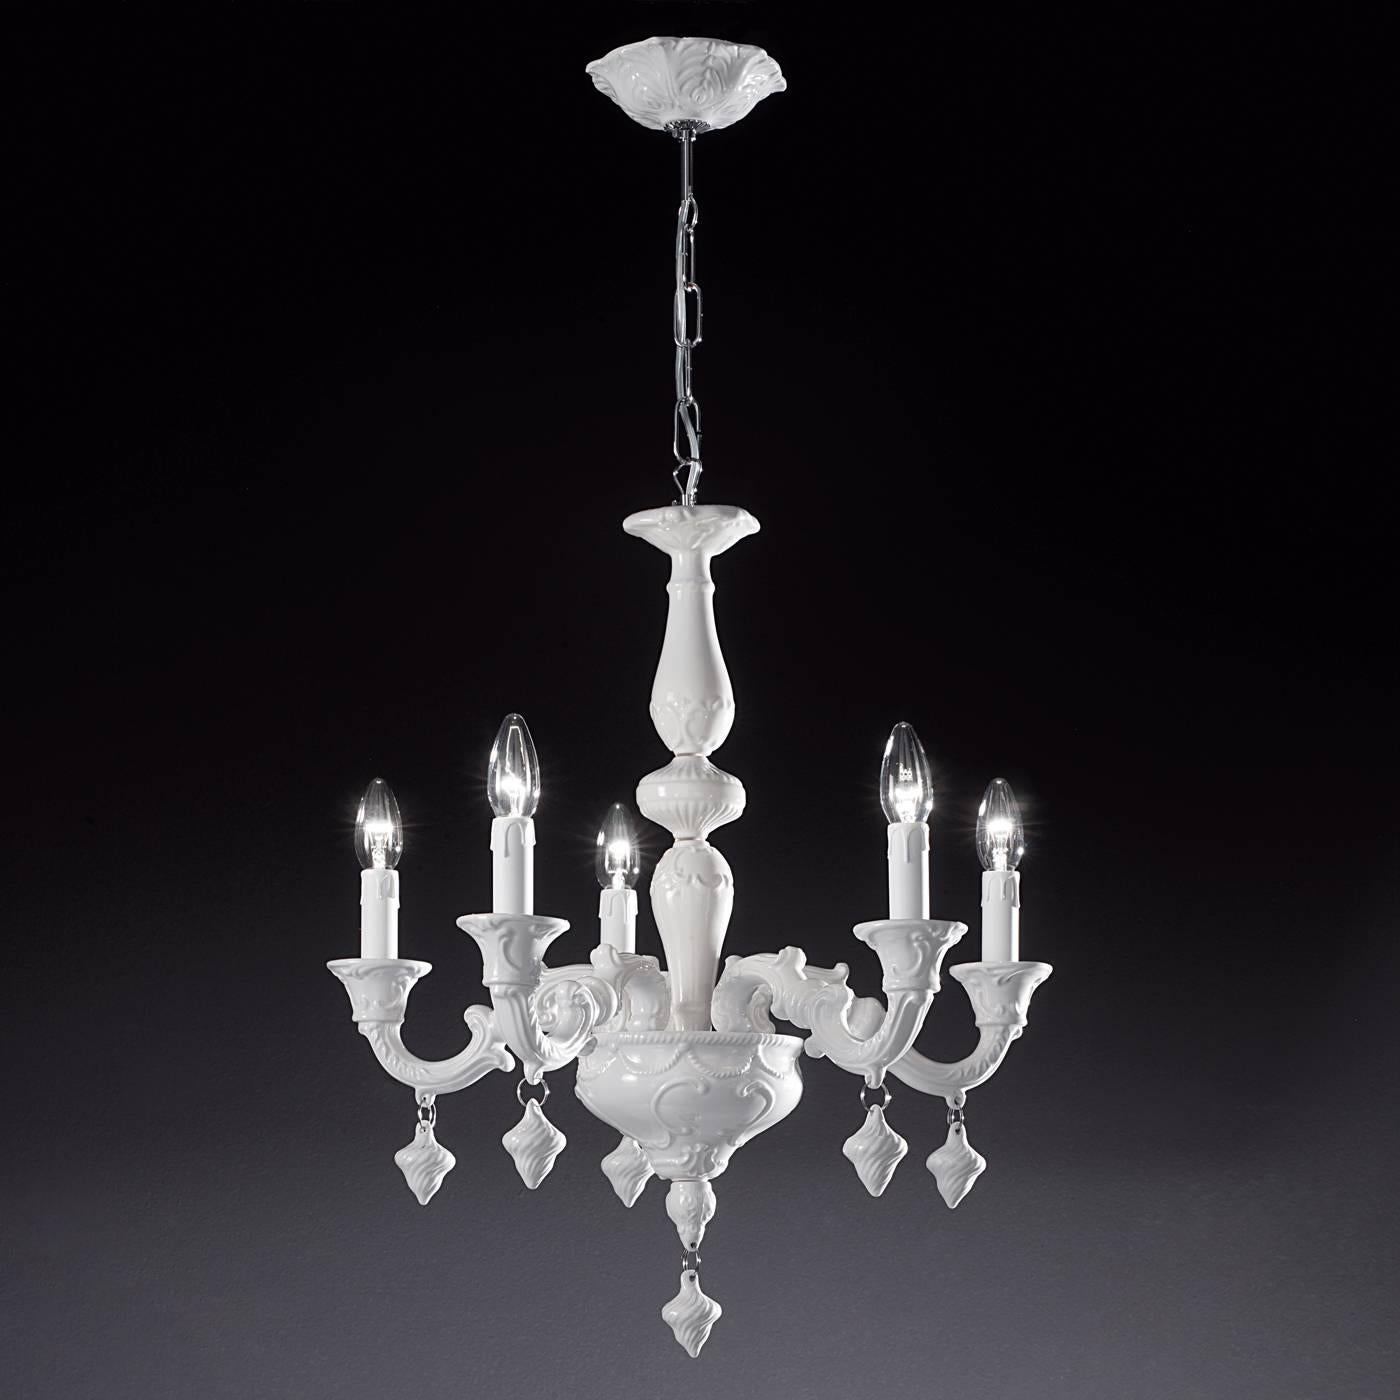 This delicate chandelier of a smaller size makes for an elegant and refined addition to the decor of any home. Its size makes it suitable for smaller rooms, hallways, entryways, or for a bedroom. This entirely handcrafted piece features a polished